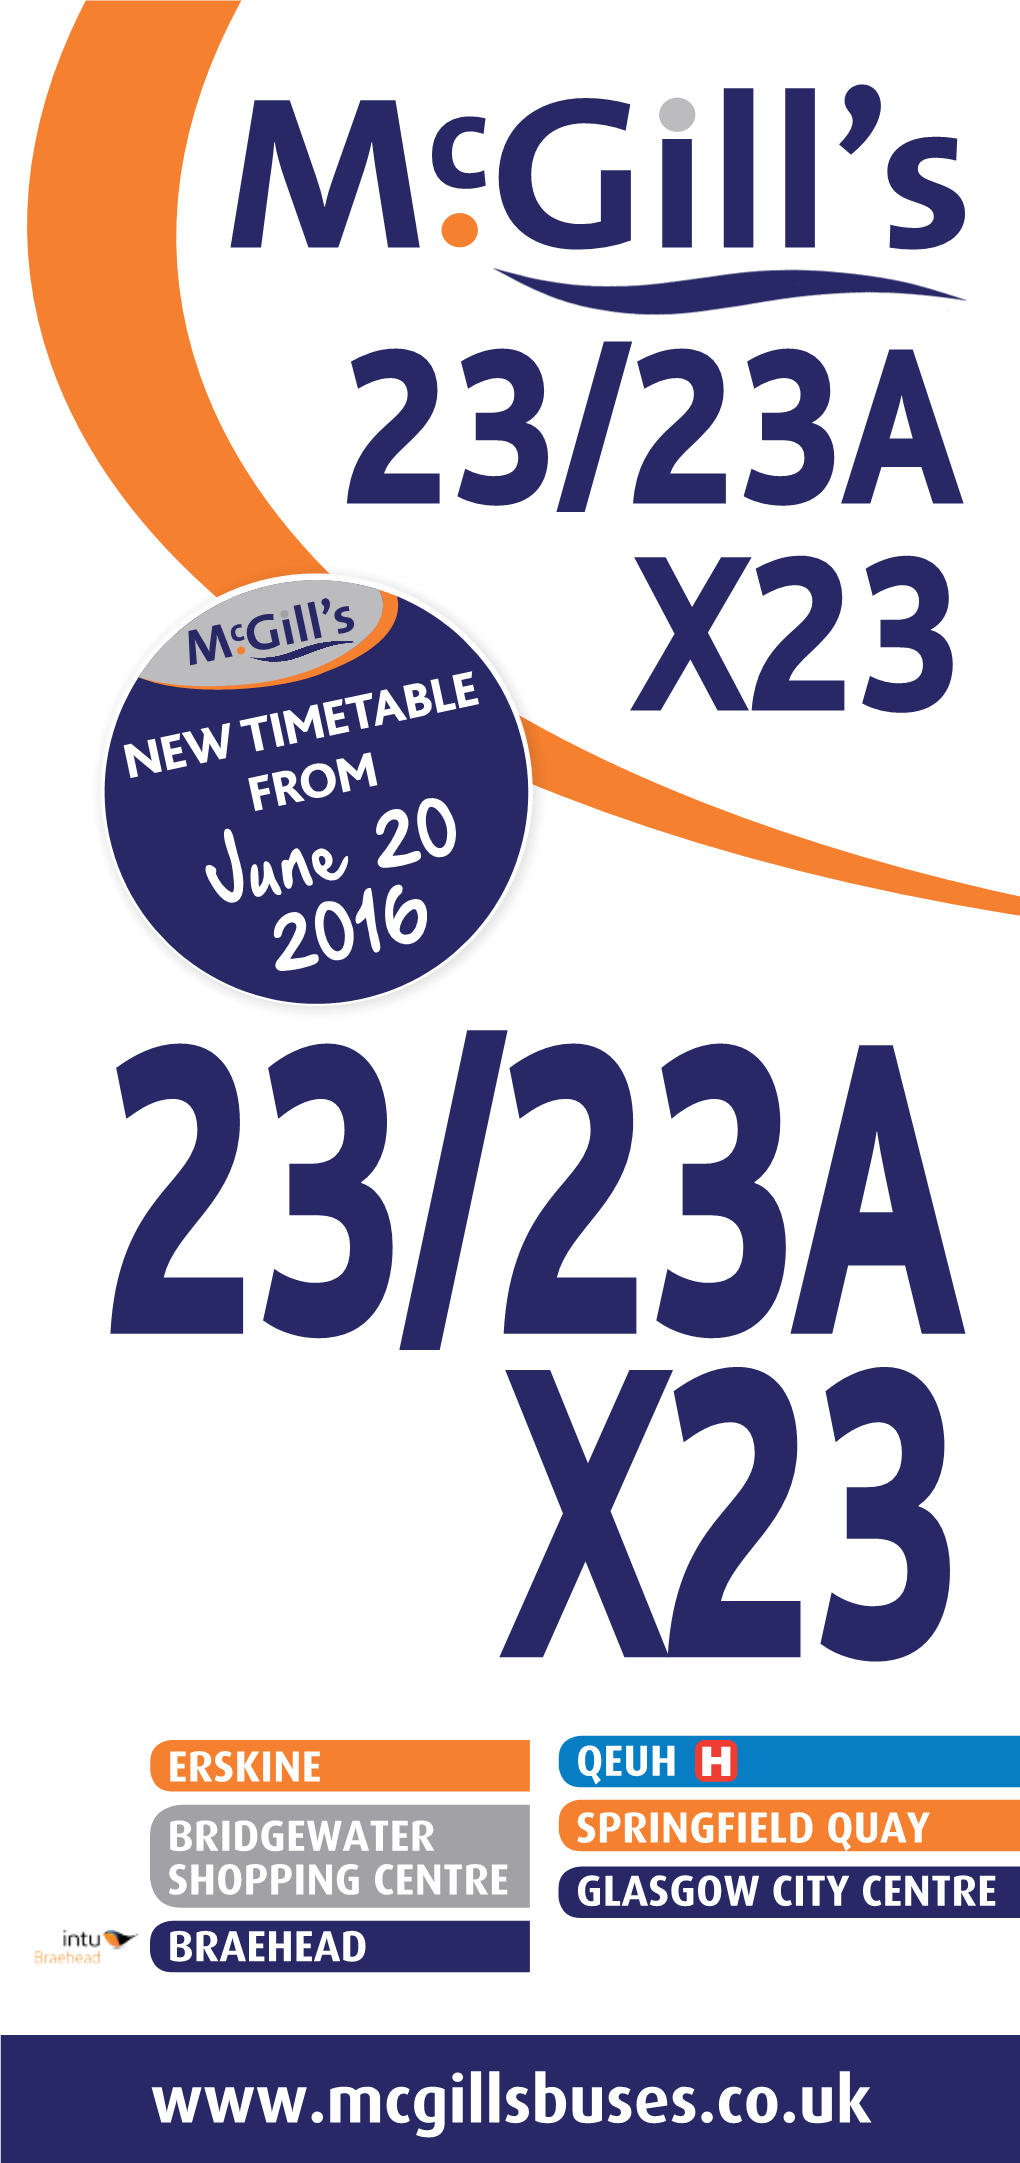 23/23A X23 NEW TIMETABLE from June 20 2016 23/23A X23 ERSKINE QEUH HH BRIDGEWATER SPRINGFIELD QUAY SHOPPING CENTRE GLASGOW CITY CENTRE BRAEHEAD